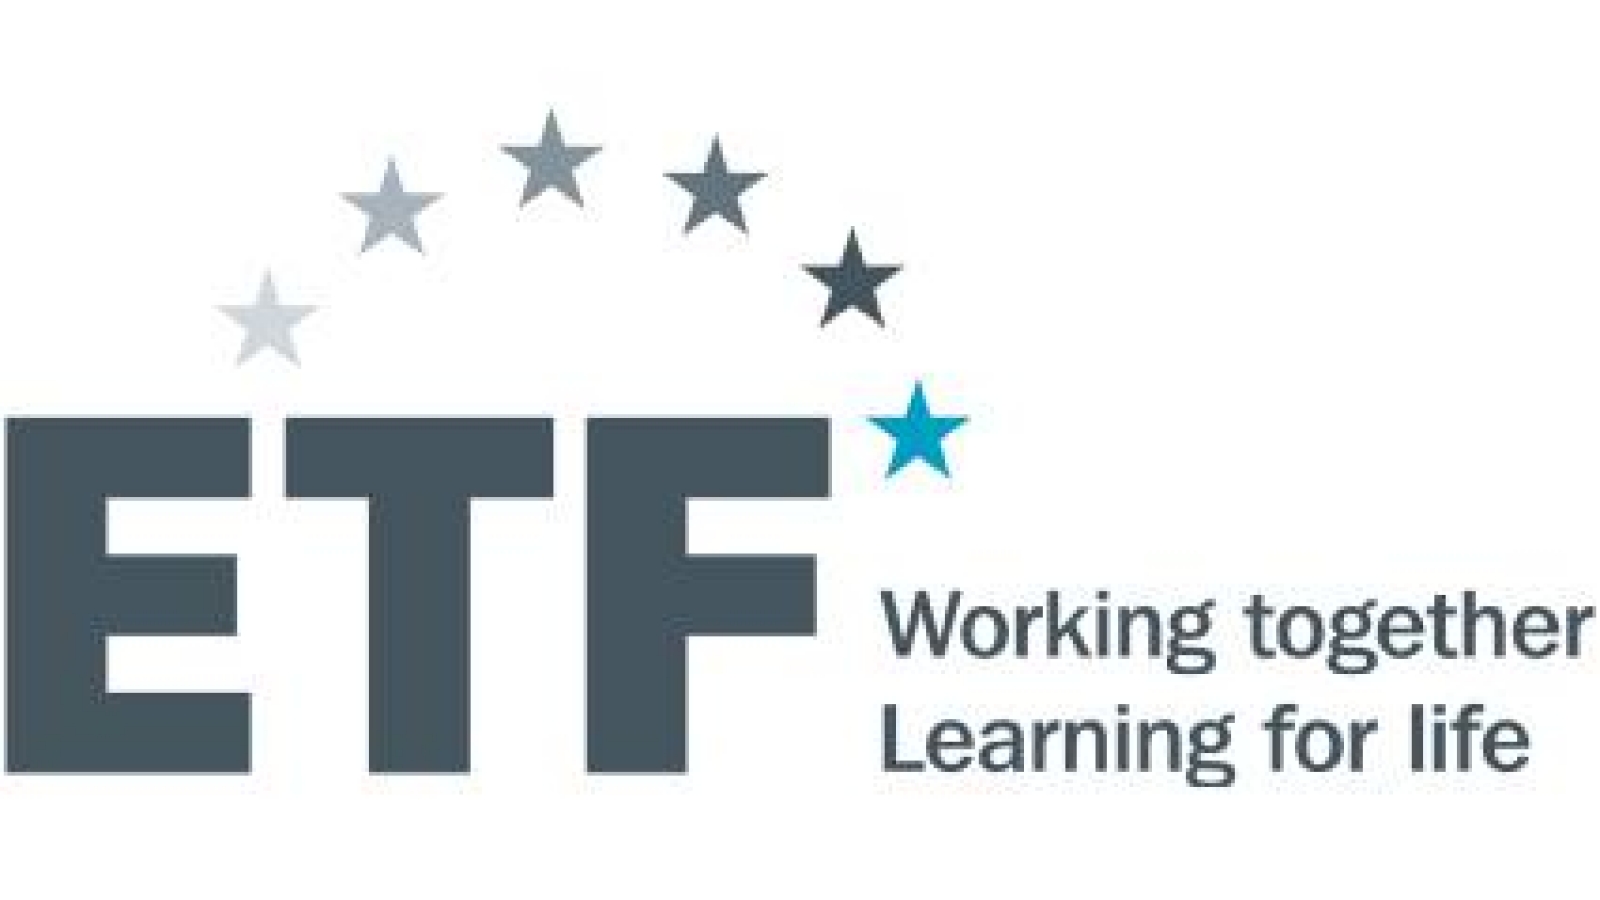 European Training Foundation launches two calls for examples of good practice in partner countries